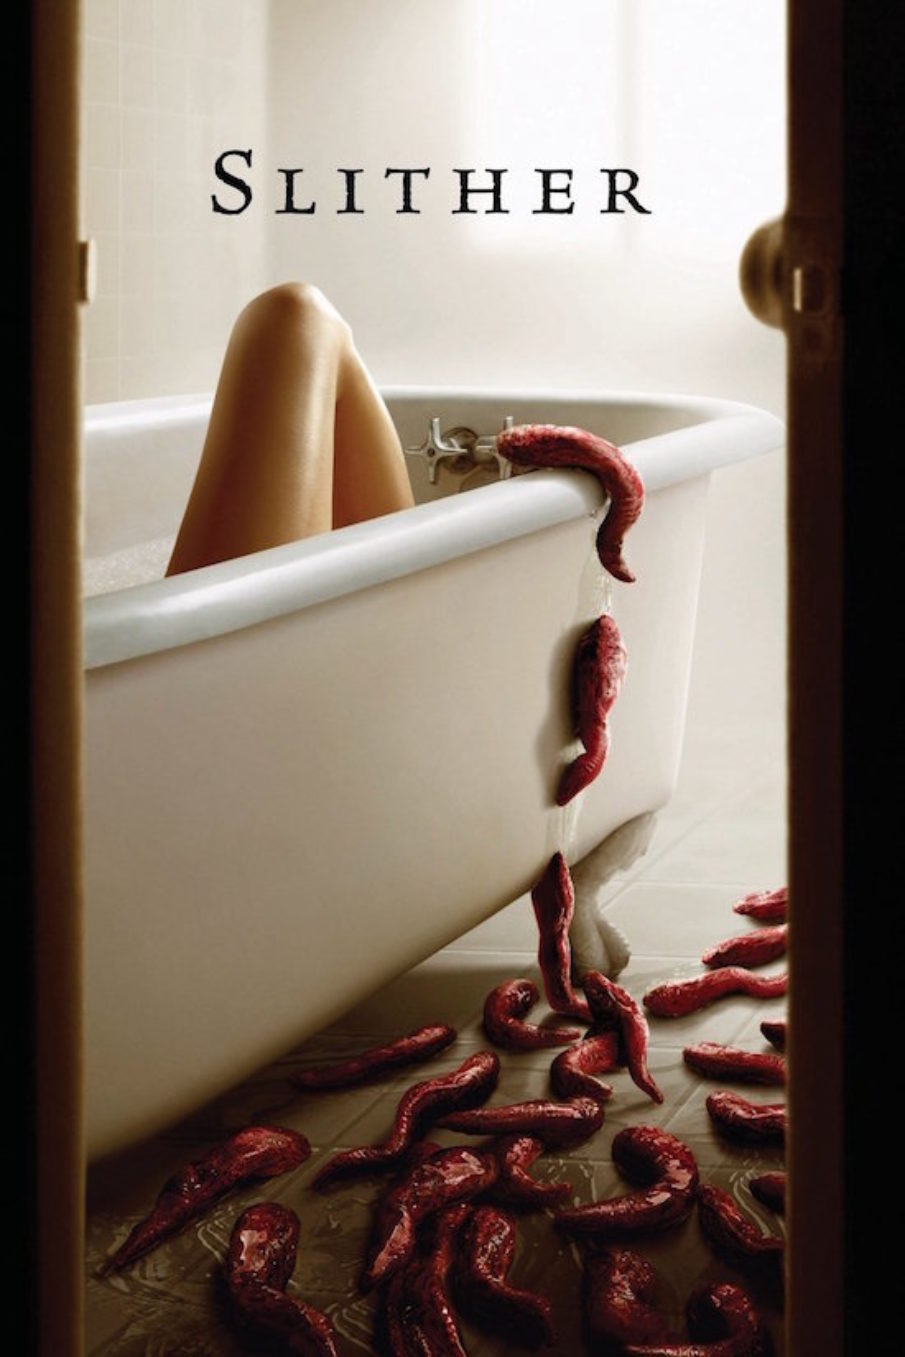 Slither (2006) – 31 Days of Halloween